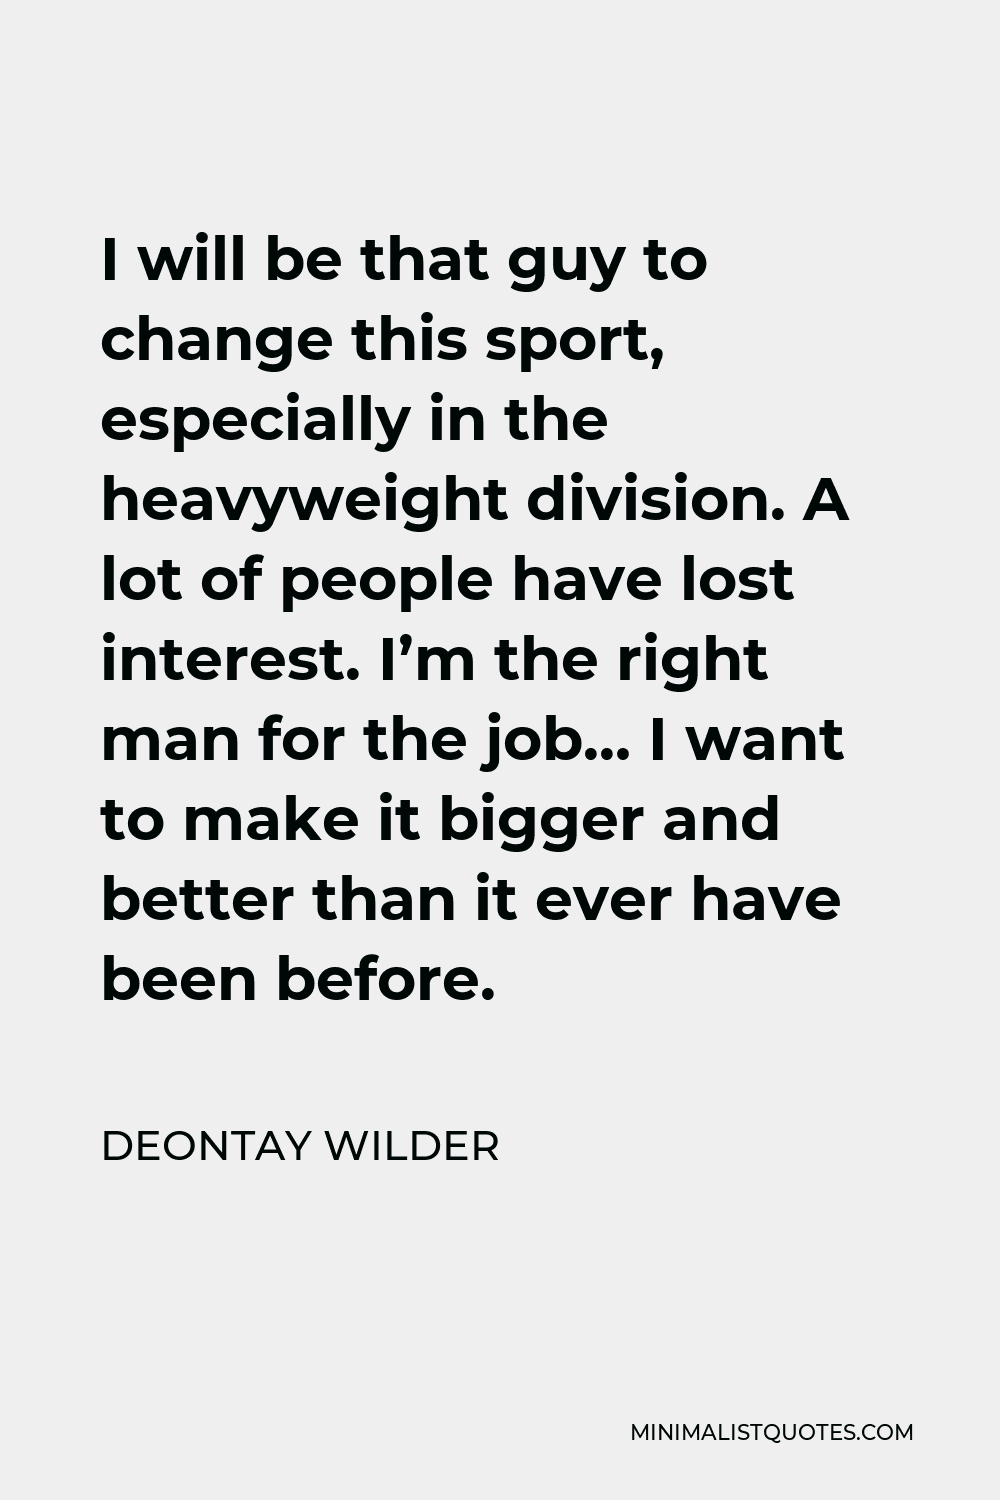 Deontay Wilder Quote - I will be that guy to change this sport, especially in the heavyweight division. A lot of people have lost interest. I’m the right man for the job… I want to make it bigger and better than it ever have been before.